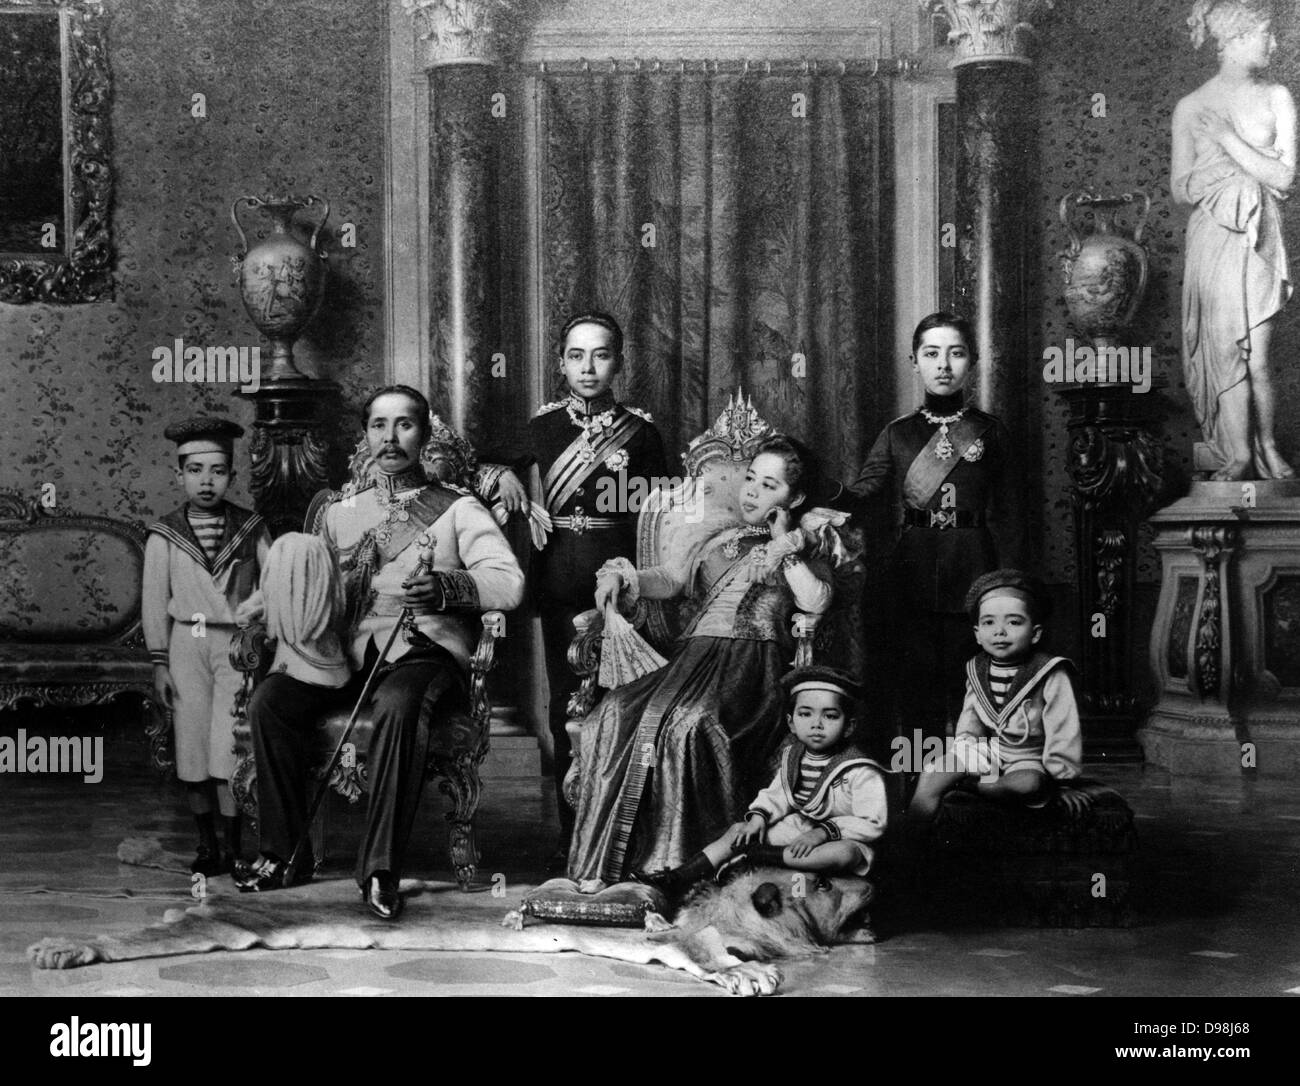 King Chulalongkorn the Great (Rama V) of Siam, with his family. In this photo, Crown Prince Vajirunhis leans on his father's chair, while the future King Rama VI, Prince Vajiravudh, stands behind the queen's chair. It's not entirely clear which of Chulalongkorn's four queens is pictured here, but she most resembles Queen Saovabha Bongsri, the mother of Vajiravudh. Crown Prince Vajirunhis died unexpectedly at the age of 16 in 1894, so Chulalongkorn was succeeded by Vajiravudh instead in 1910. Stock Photo